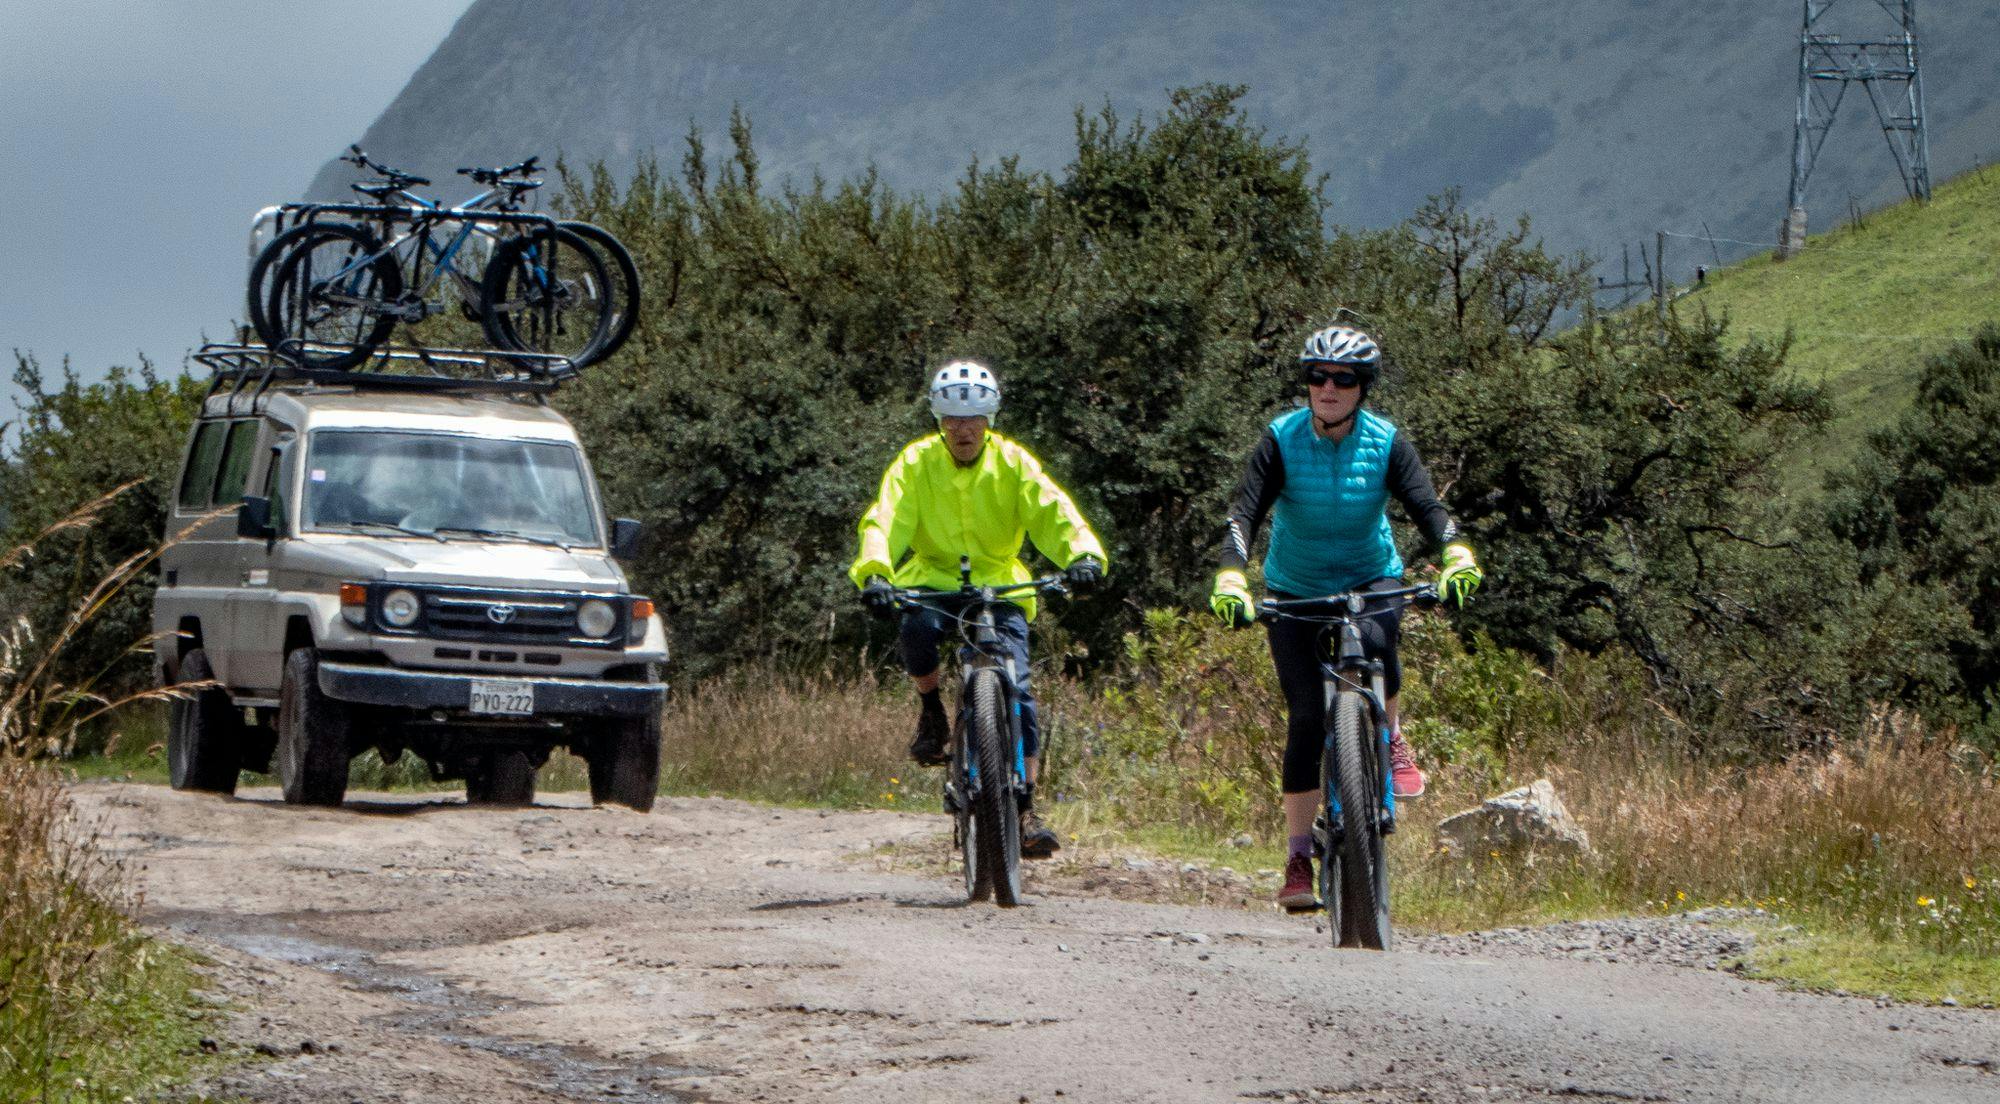 Five Days Biking Adventure from the Andes to the Amazon Rainforest